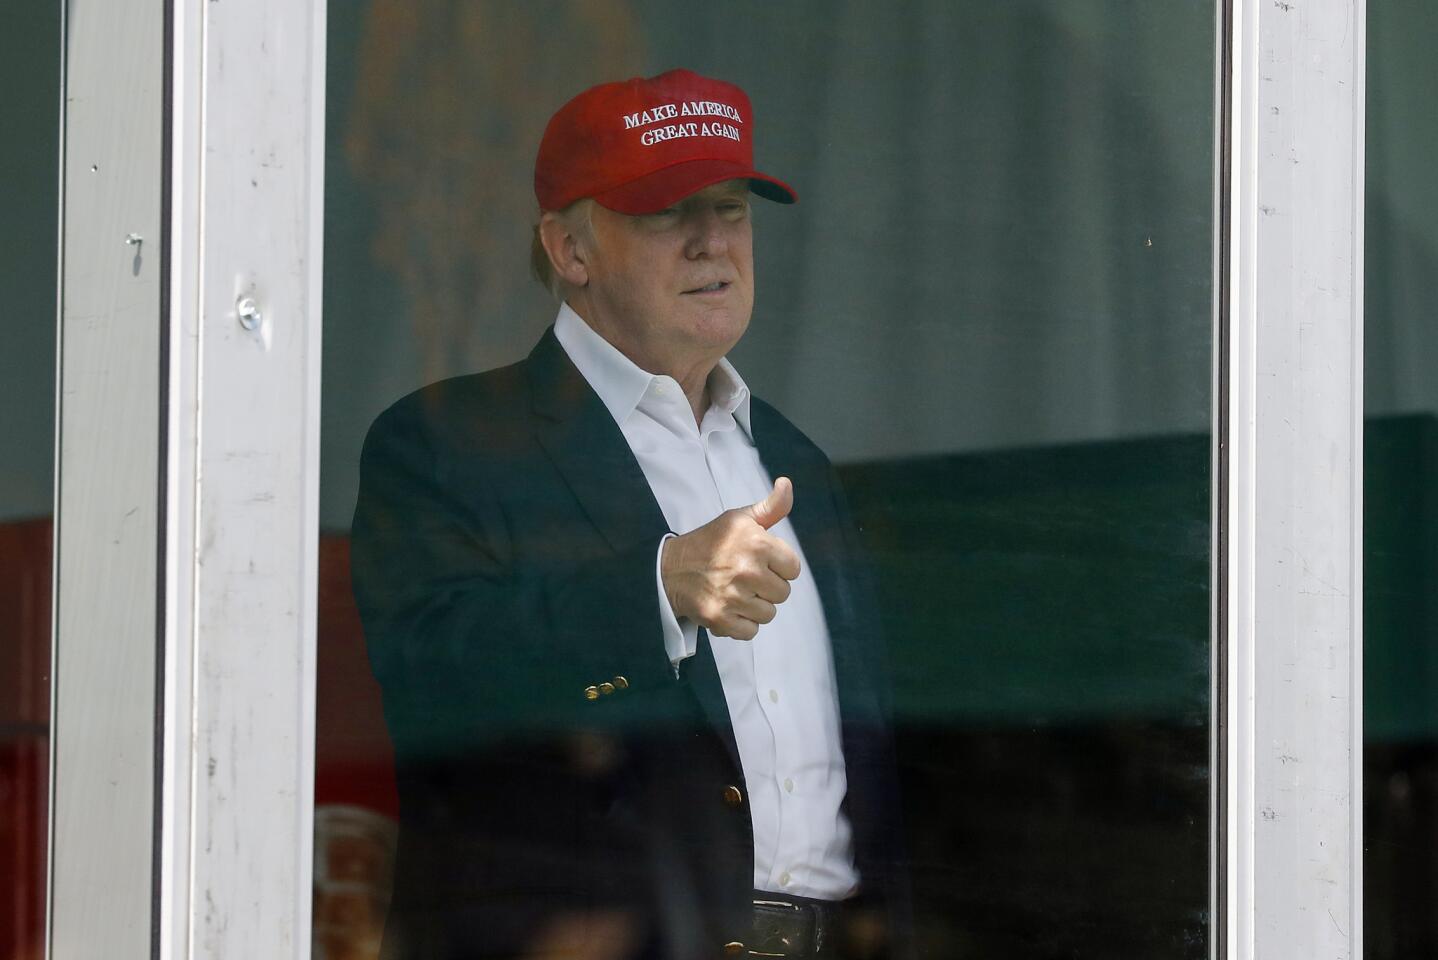 President Donald Trump gives the thumbs-up from his presidential viewing stand Saturday, July 15, 2017, during the U.S. Women's Open Golf tournament at Trump National Golf Club in Bedminster, N.J.